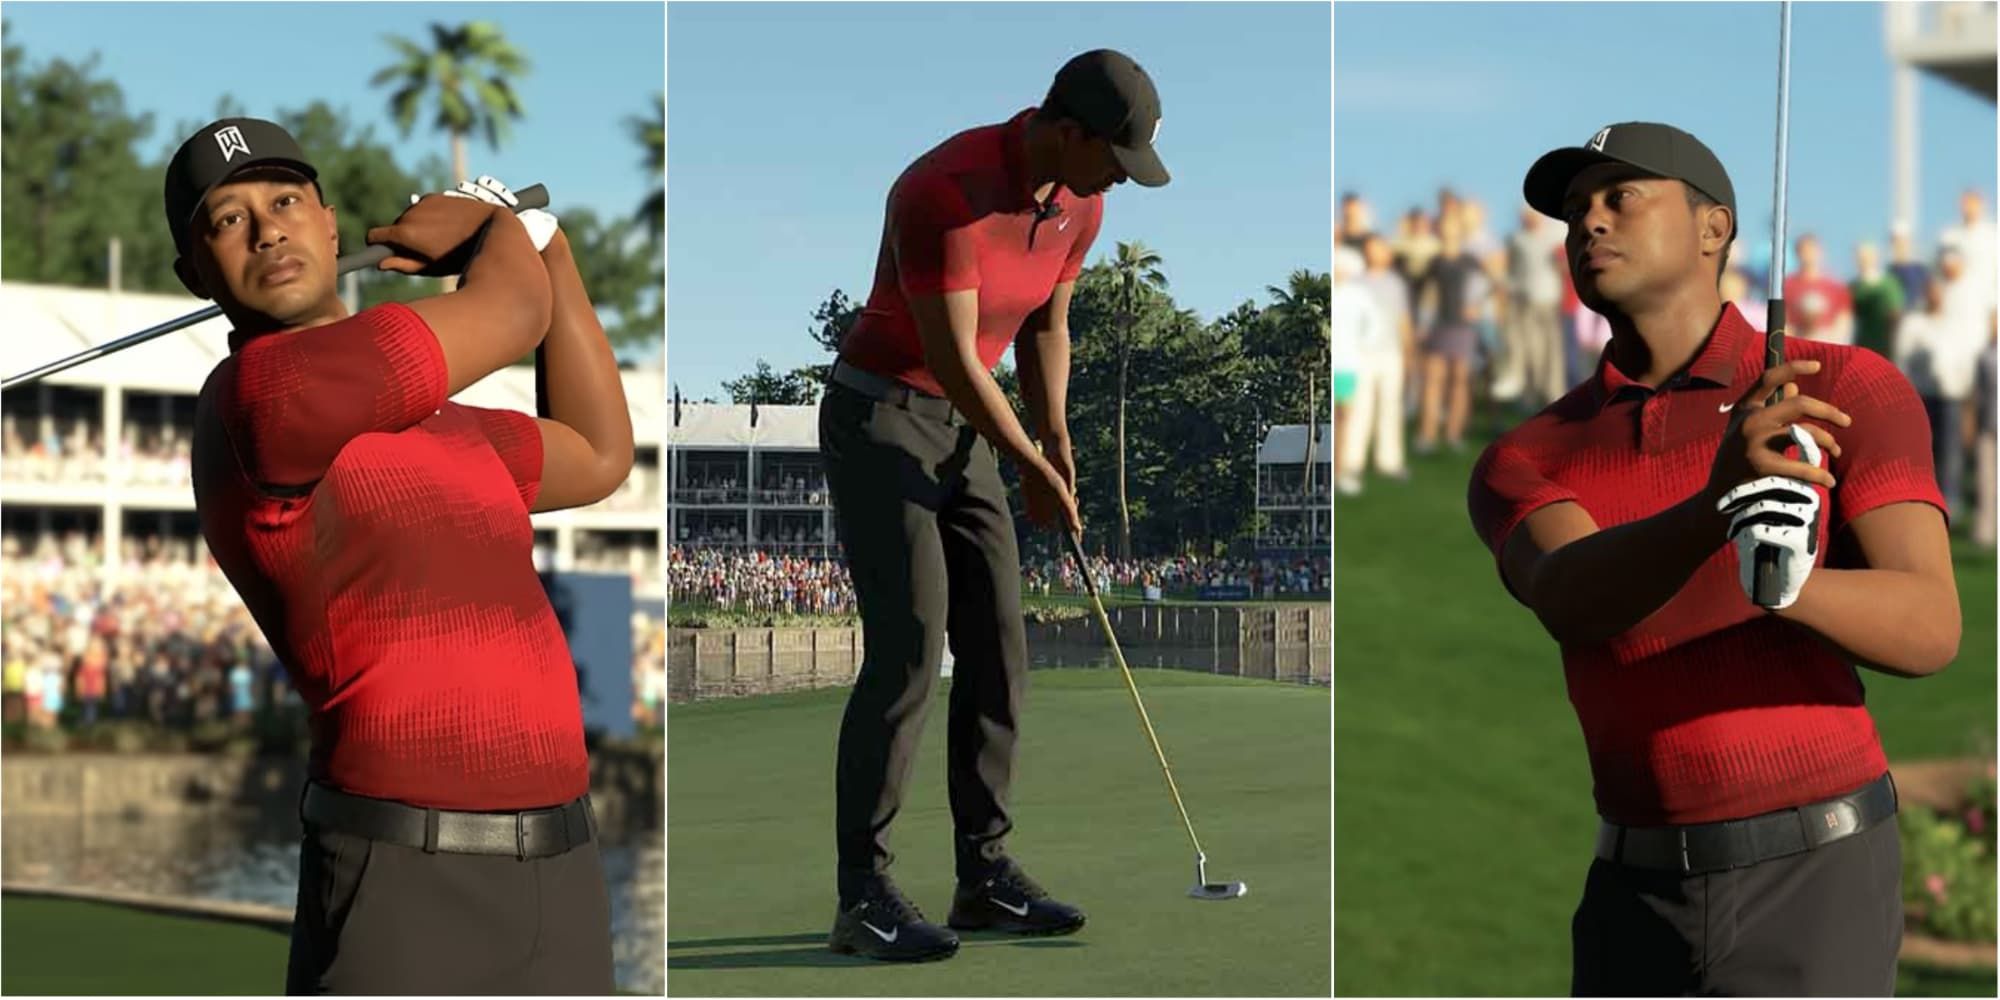 Tiger Woods is shown three times. The first is a powerful swing off the tee, the second is a short putt, and the third is a chip shot from just off the green.